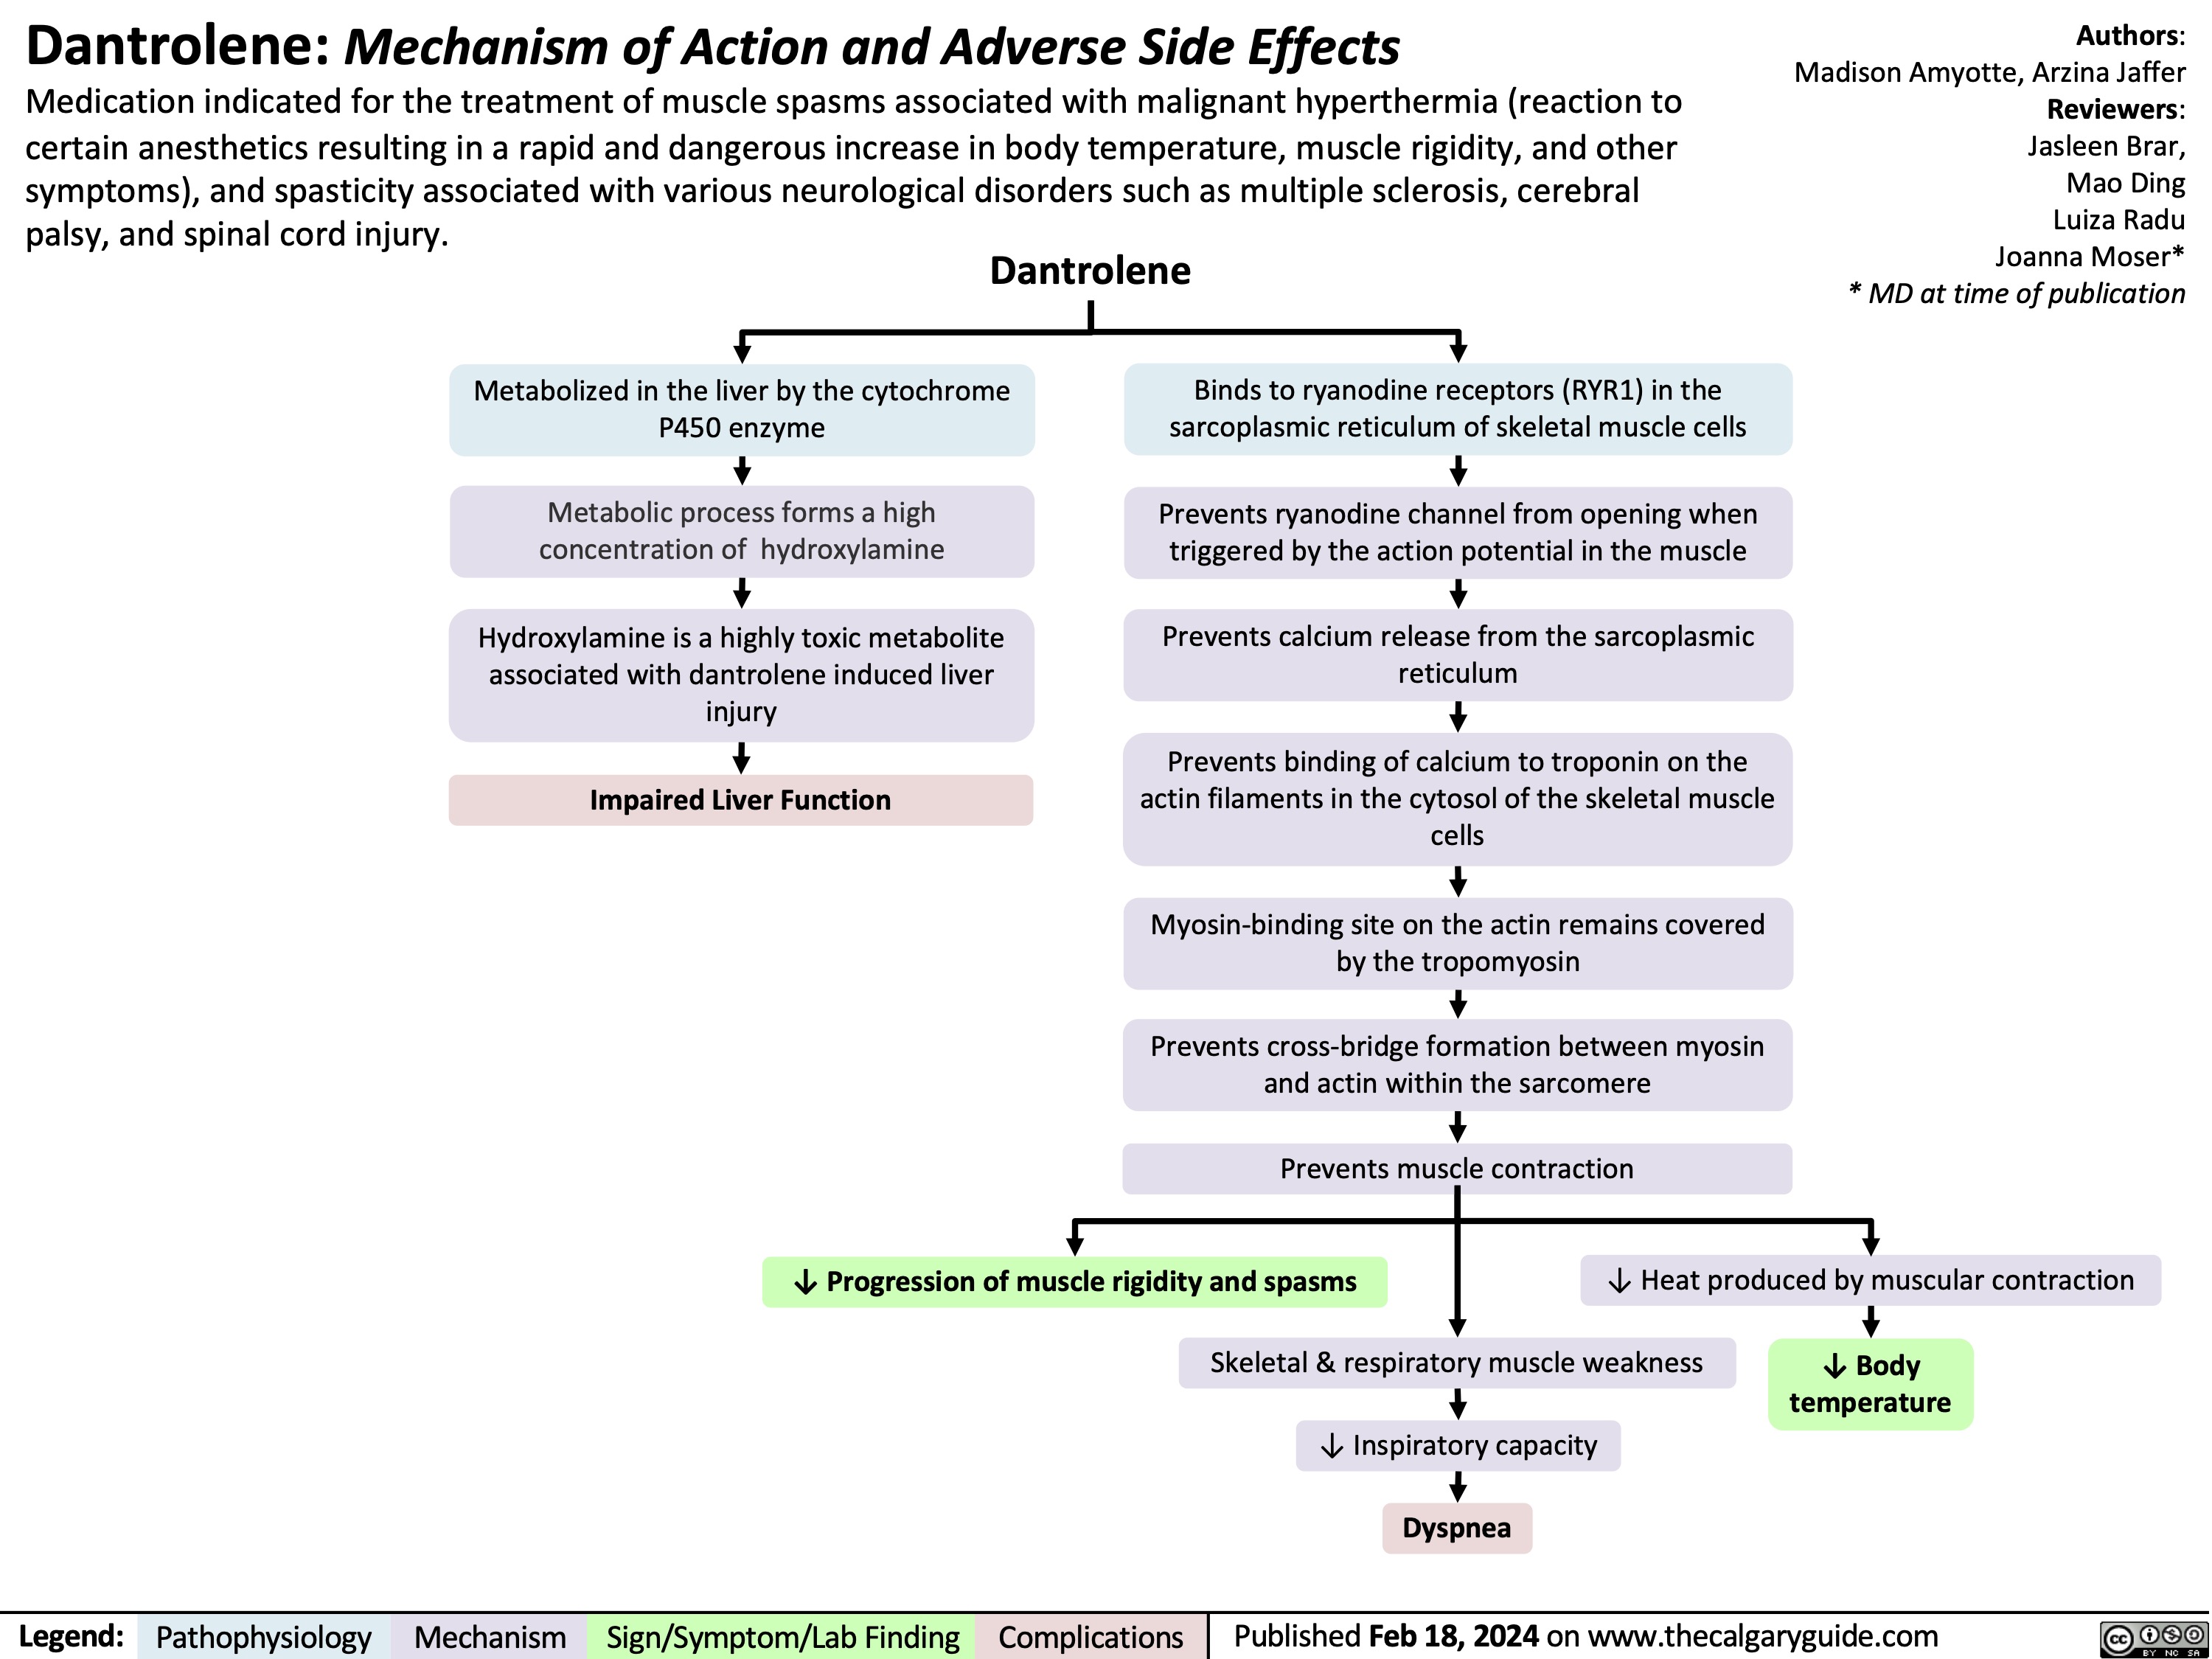 Dantrolene: Mechanism of Action and Adverse Side Effects
Medication indicated for the treatment of muscle spasms associated with malignant hyperthermia (reaction to certain anesthetics resulting in a rapid and dangerous increase in body temperature, muscle rigidity, and other symptoms), and spasticity associated with various neurological disorders such as multiple sclerosis, cerebral palsy, and spinal cord injury.
Dantrolene
Authors: Madison Amyotte, Arzina Jaffer Reviewers: Jasleen Brar, Mao Ding Luiza Radu Joanna Moser* * MD at time of publication
   Metabolized in the liver by the cytochrome P450 enzyme
Metabolic process forms a high concentration of hydroxylamine
Hydroxylamine is a highly toxic metabolite associated with dantrolene induced liver injury
Impaired Liver Function
Binds to ryanodine receptors (RYR1) in the sarcoplasmic reticulum of skeletal muscle cells
Prevents ryanodine channel from opening when triggered by the action potential in the muscle
Prevents calcium release from the sarcoplasmic reticulum
Prevents binding of calcium to troponin on the actin filaments in the cytosol of the skeletal muscle cells
Myosin-binding site on the actin remains covered by the tropomyosin
Prevents cross-bridge formation between myosin and actin within the sarcomere
         Prevents muscle contraction
↓ Progression of muscle rigidity and spasms ↓ Heat produced by muscular contraction
Skeletal & respiratory muscle weakness ↓ Body temperature
↓ Inspiratory capacity
       Dyspnea
 Legend:
 Pathophysiology
Mechanism
Sign/Symptom/Lab Finding
 Complications
Published Feb 18, 2024 on www.thecalgaryguide.com
    